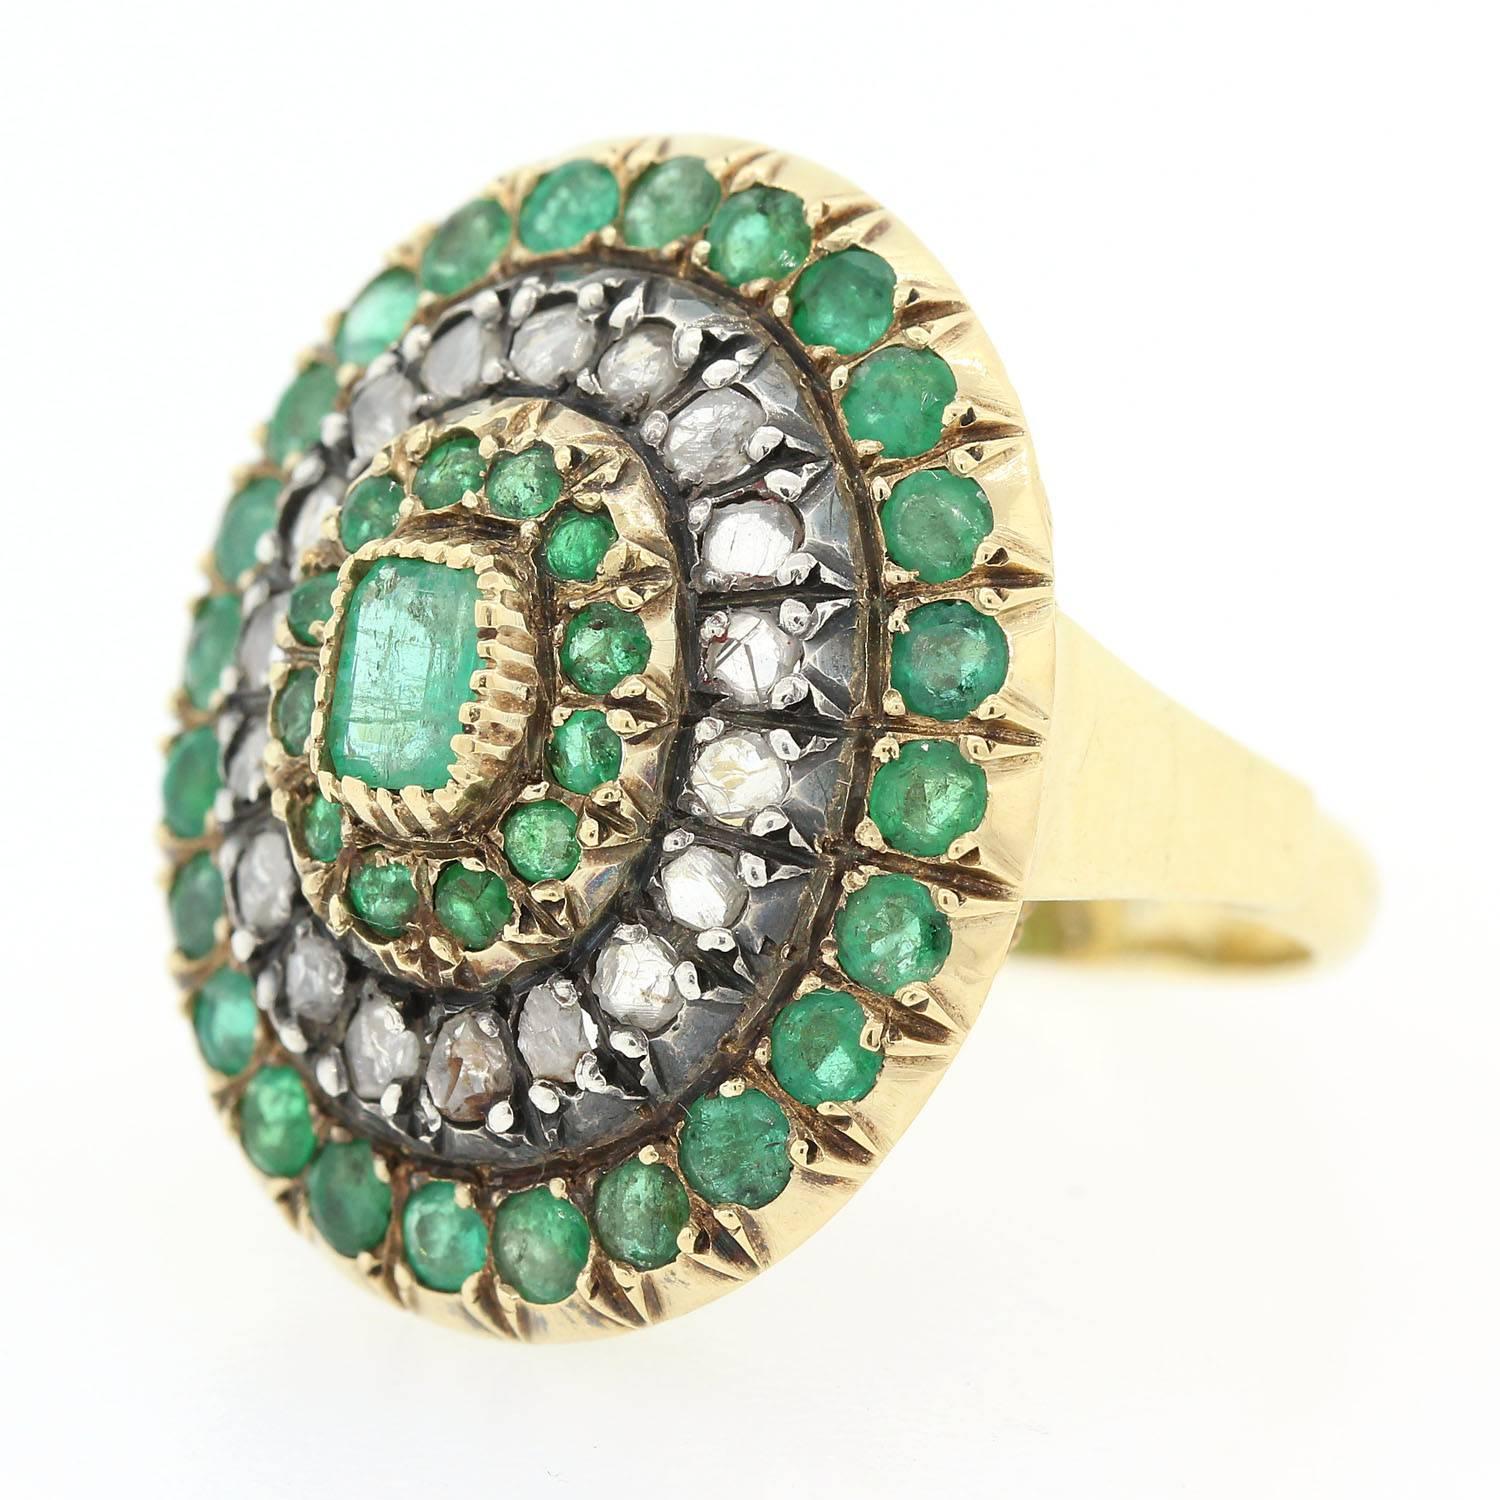 A playful oval shape 18KT gold and Silver ring, accented with a Rectangular Cut Colombian Emerald.  The Emerald is surrounded by twelve small Emeralds and two rows of  twenty Rose Cut Diamonds and twenty four Emeralds.  The setting is enhanced with